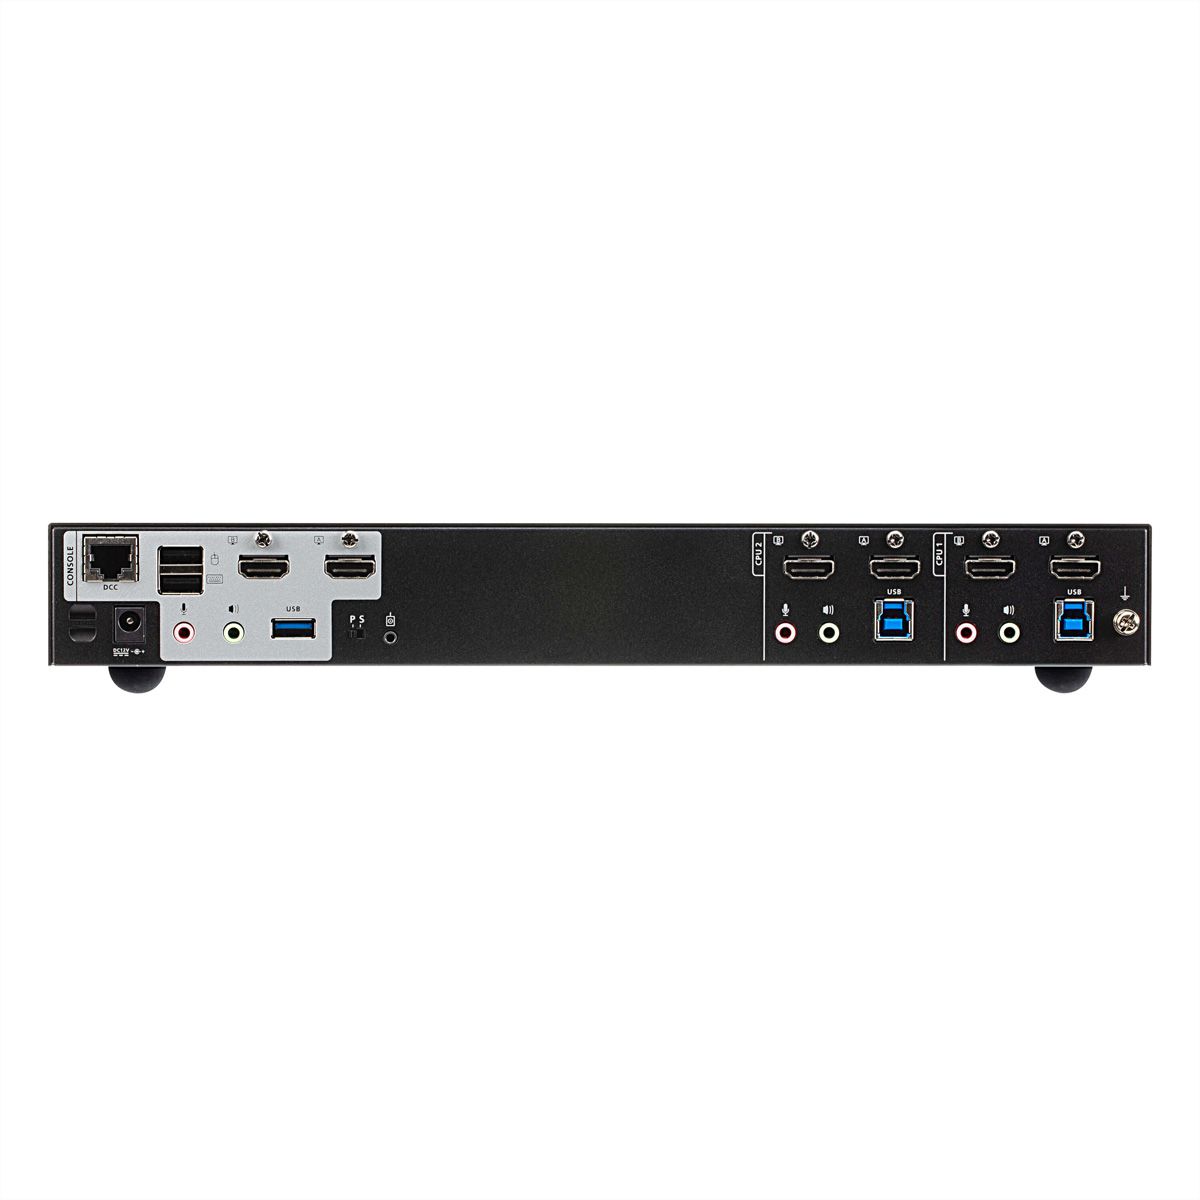 best kvm switch for home use